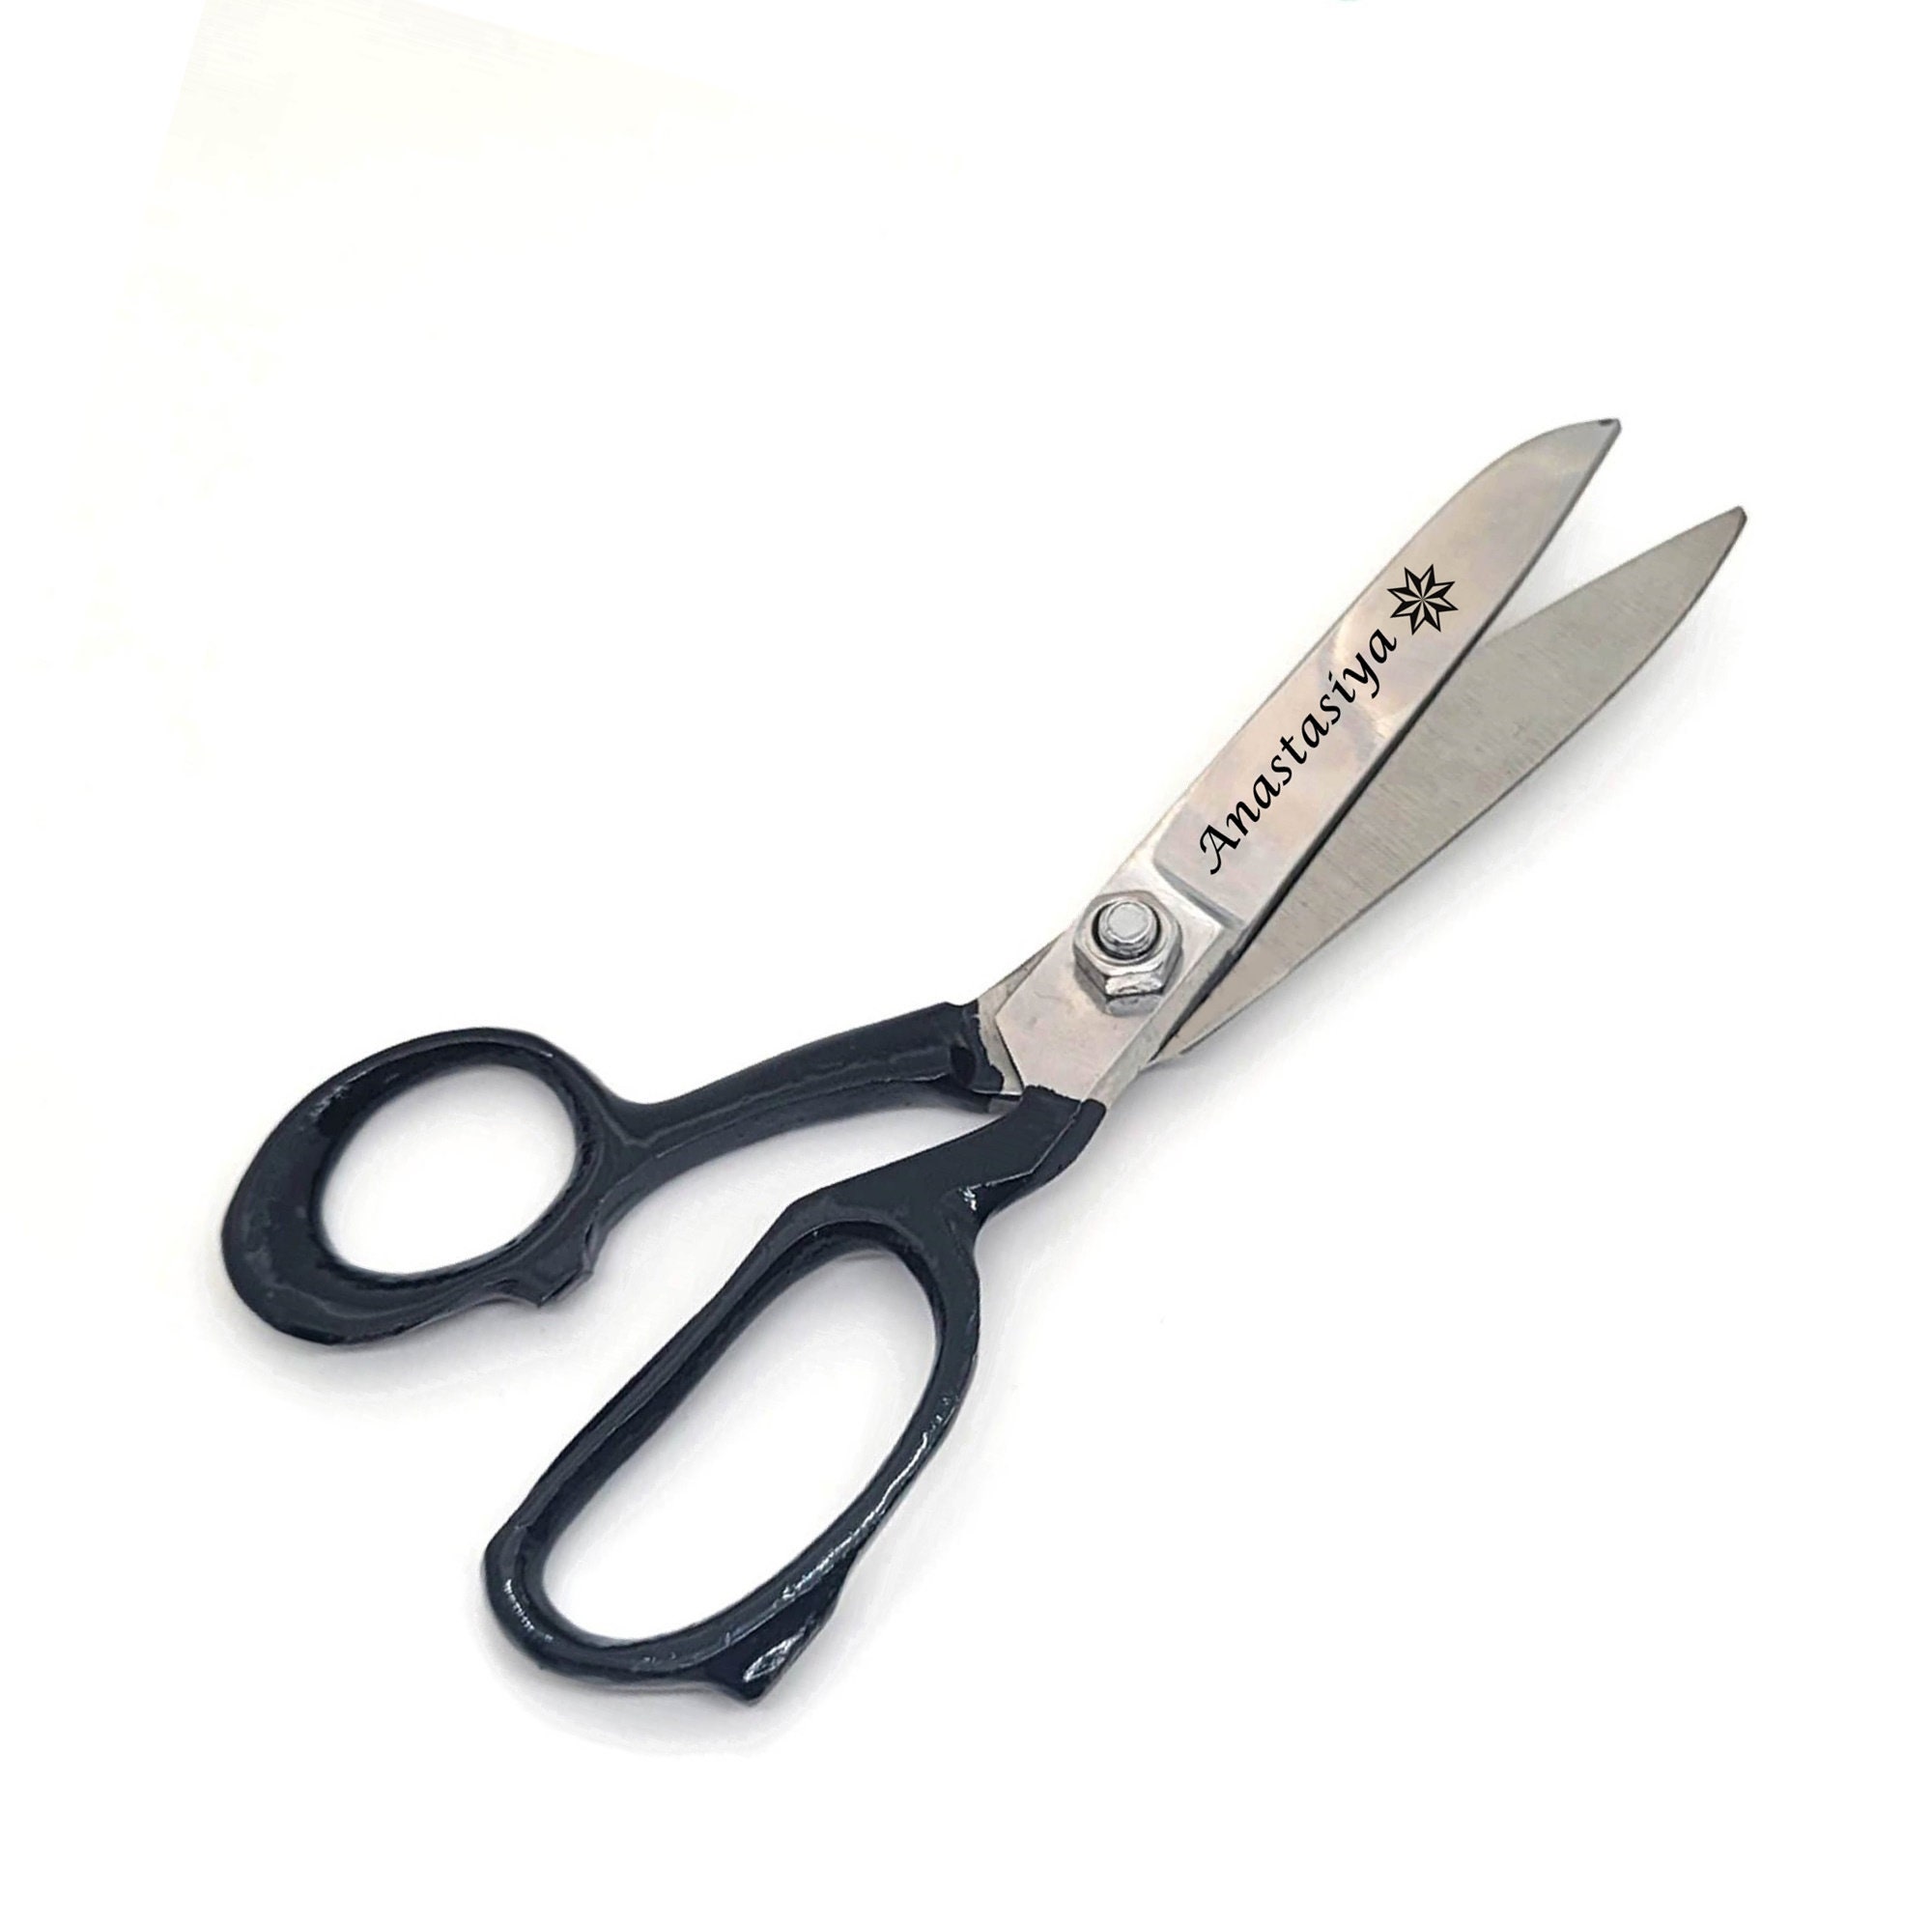 Stainless Steel Stitch Ribbon Scissors, For Hospital,Clinic at Rs